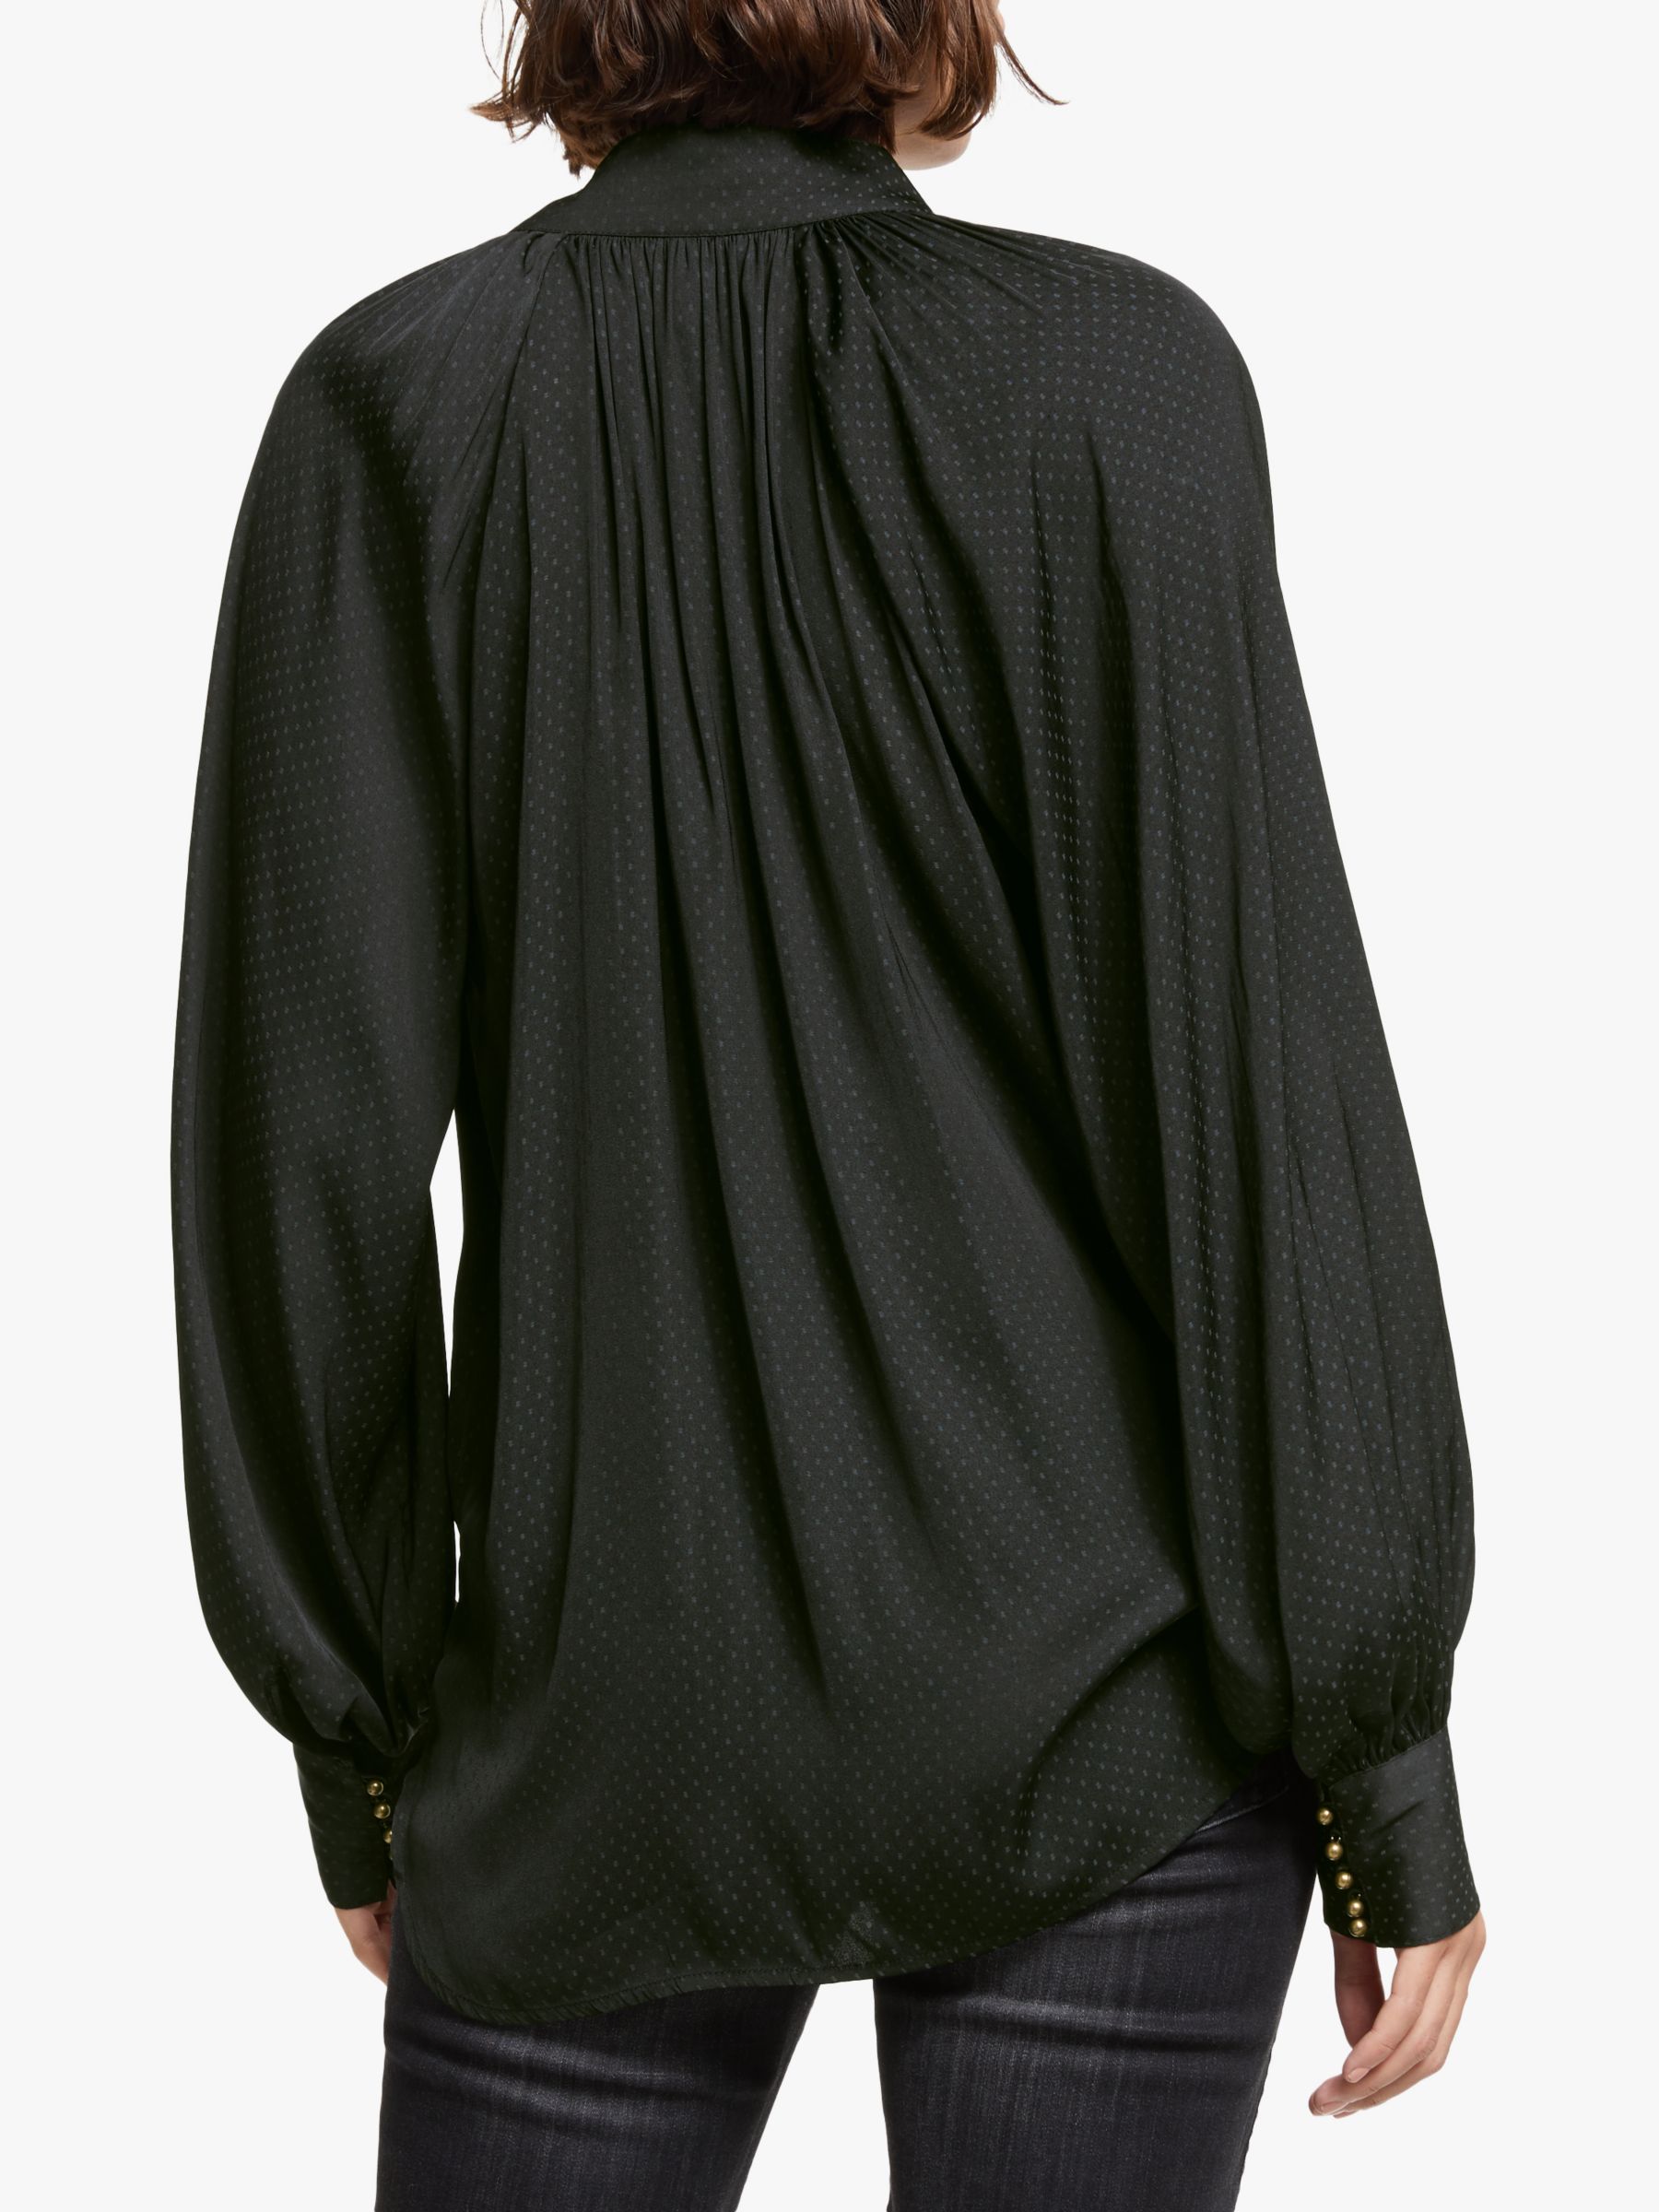 AND/OR Ivy Blouse, Black at John Lewis & Partners